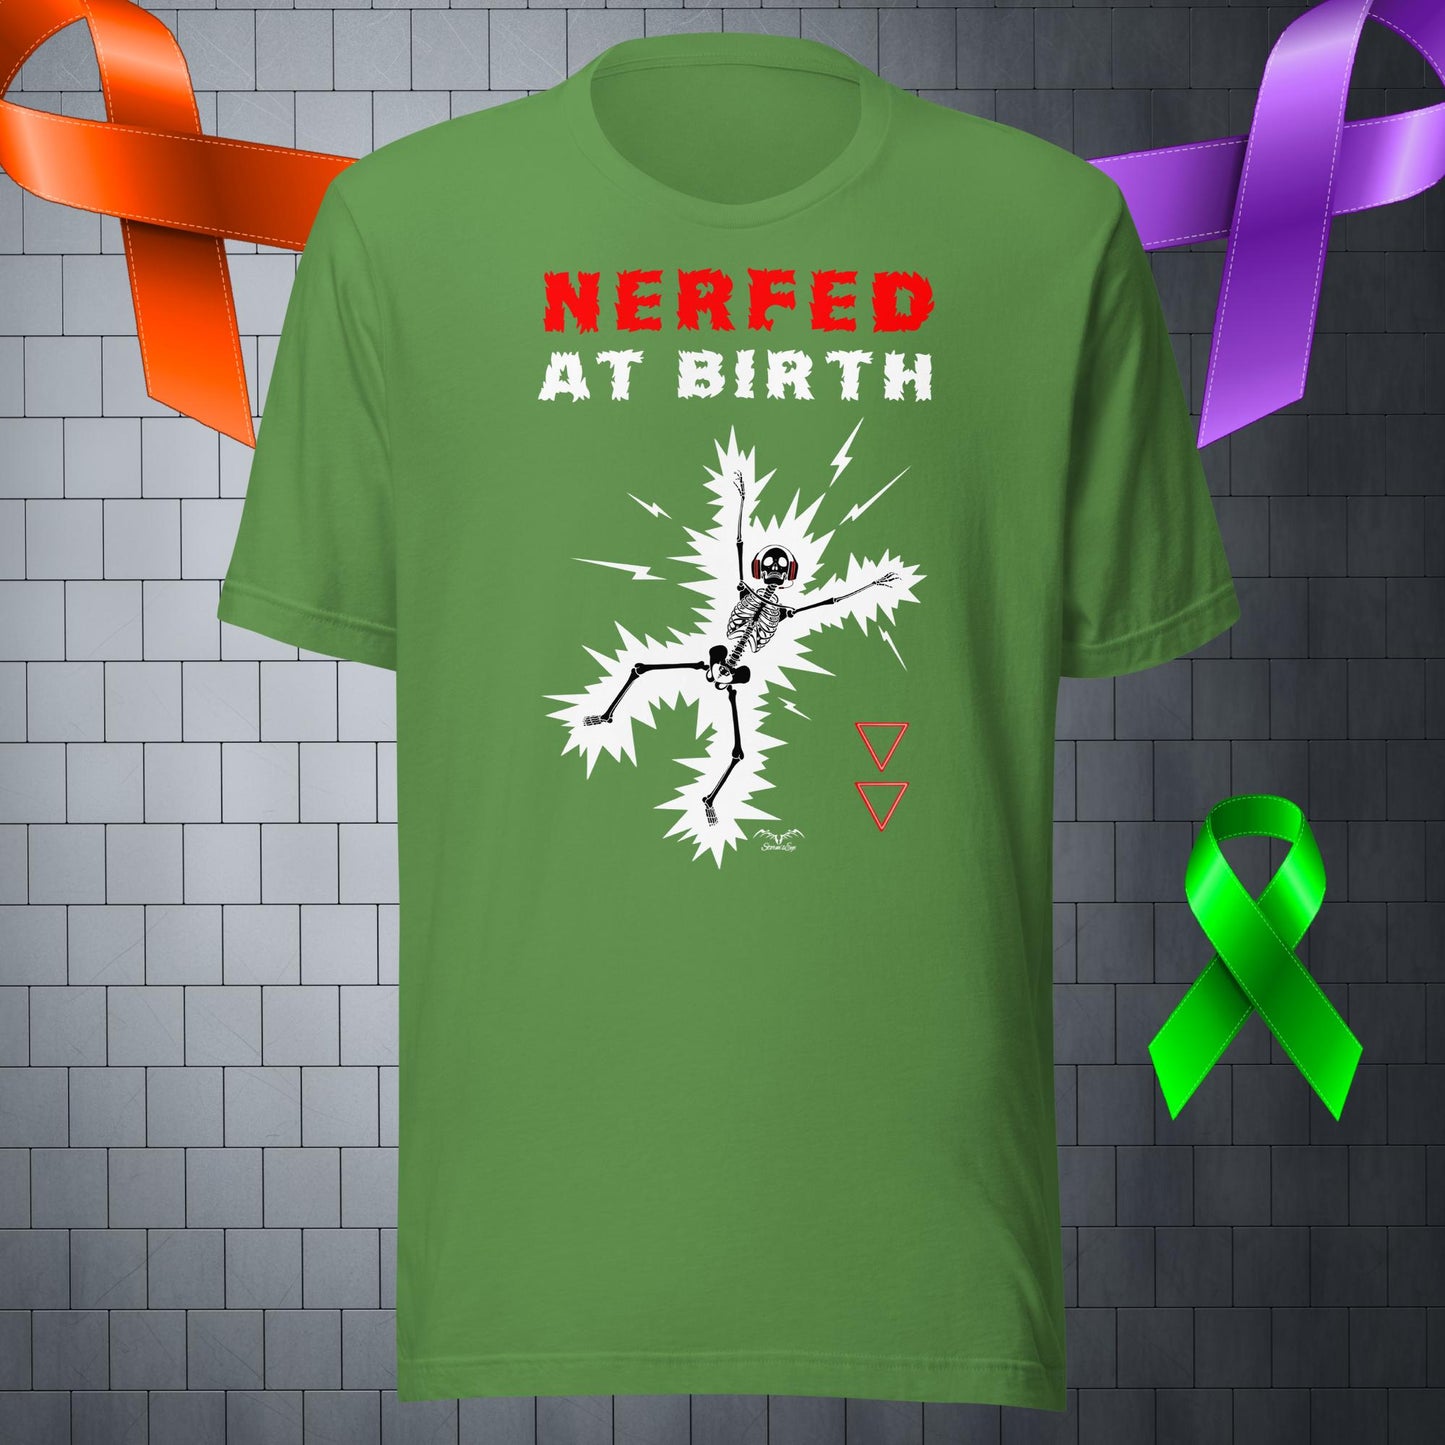 funny nerfed at birth gamer disability t-shirt bright green by stormseye design